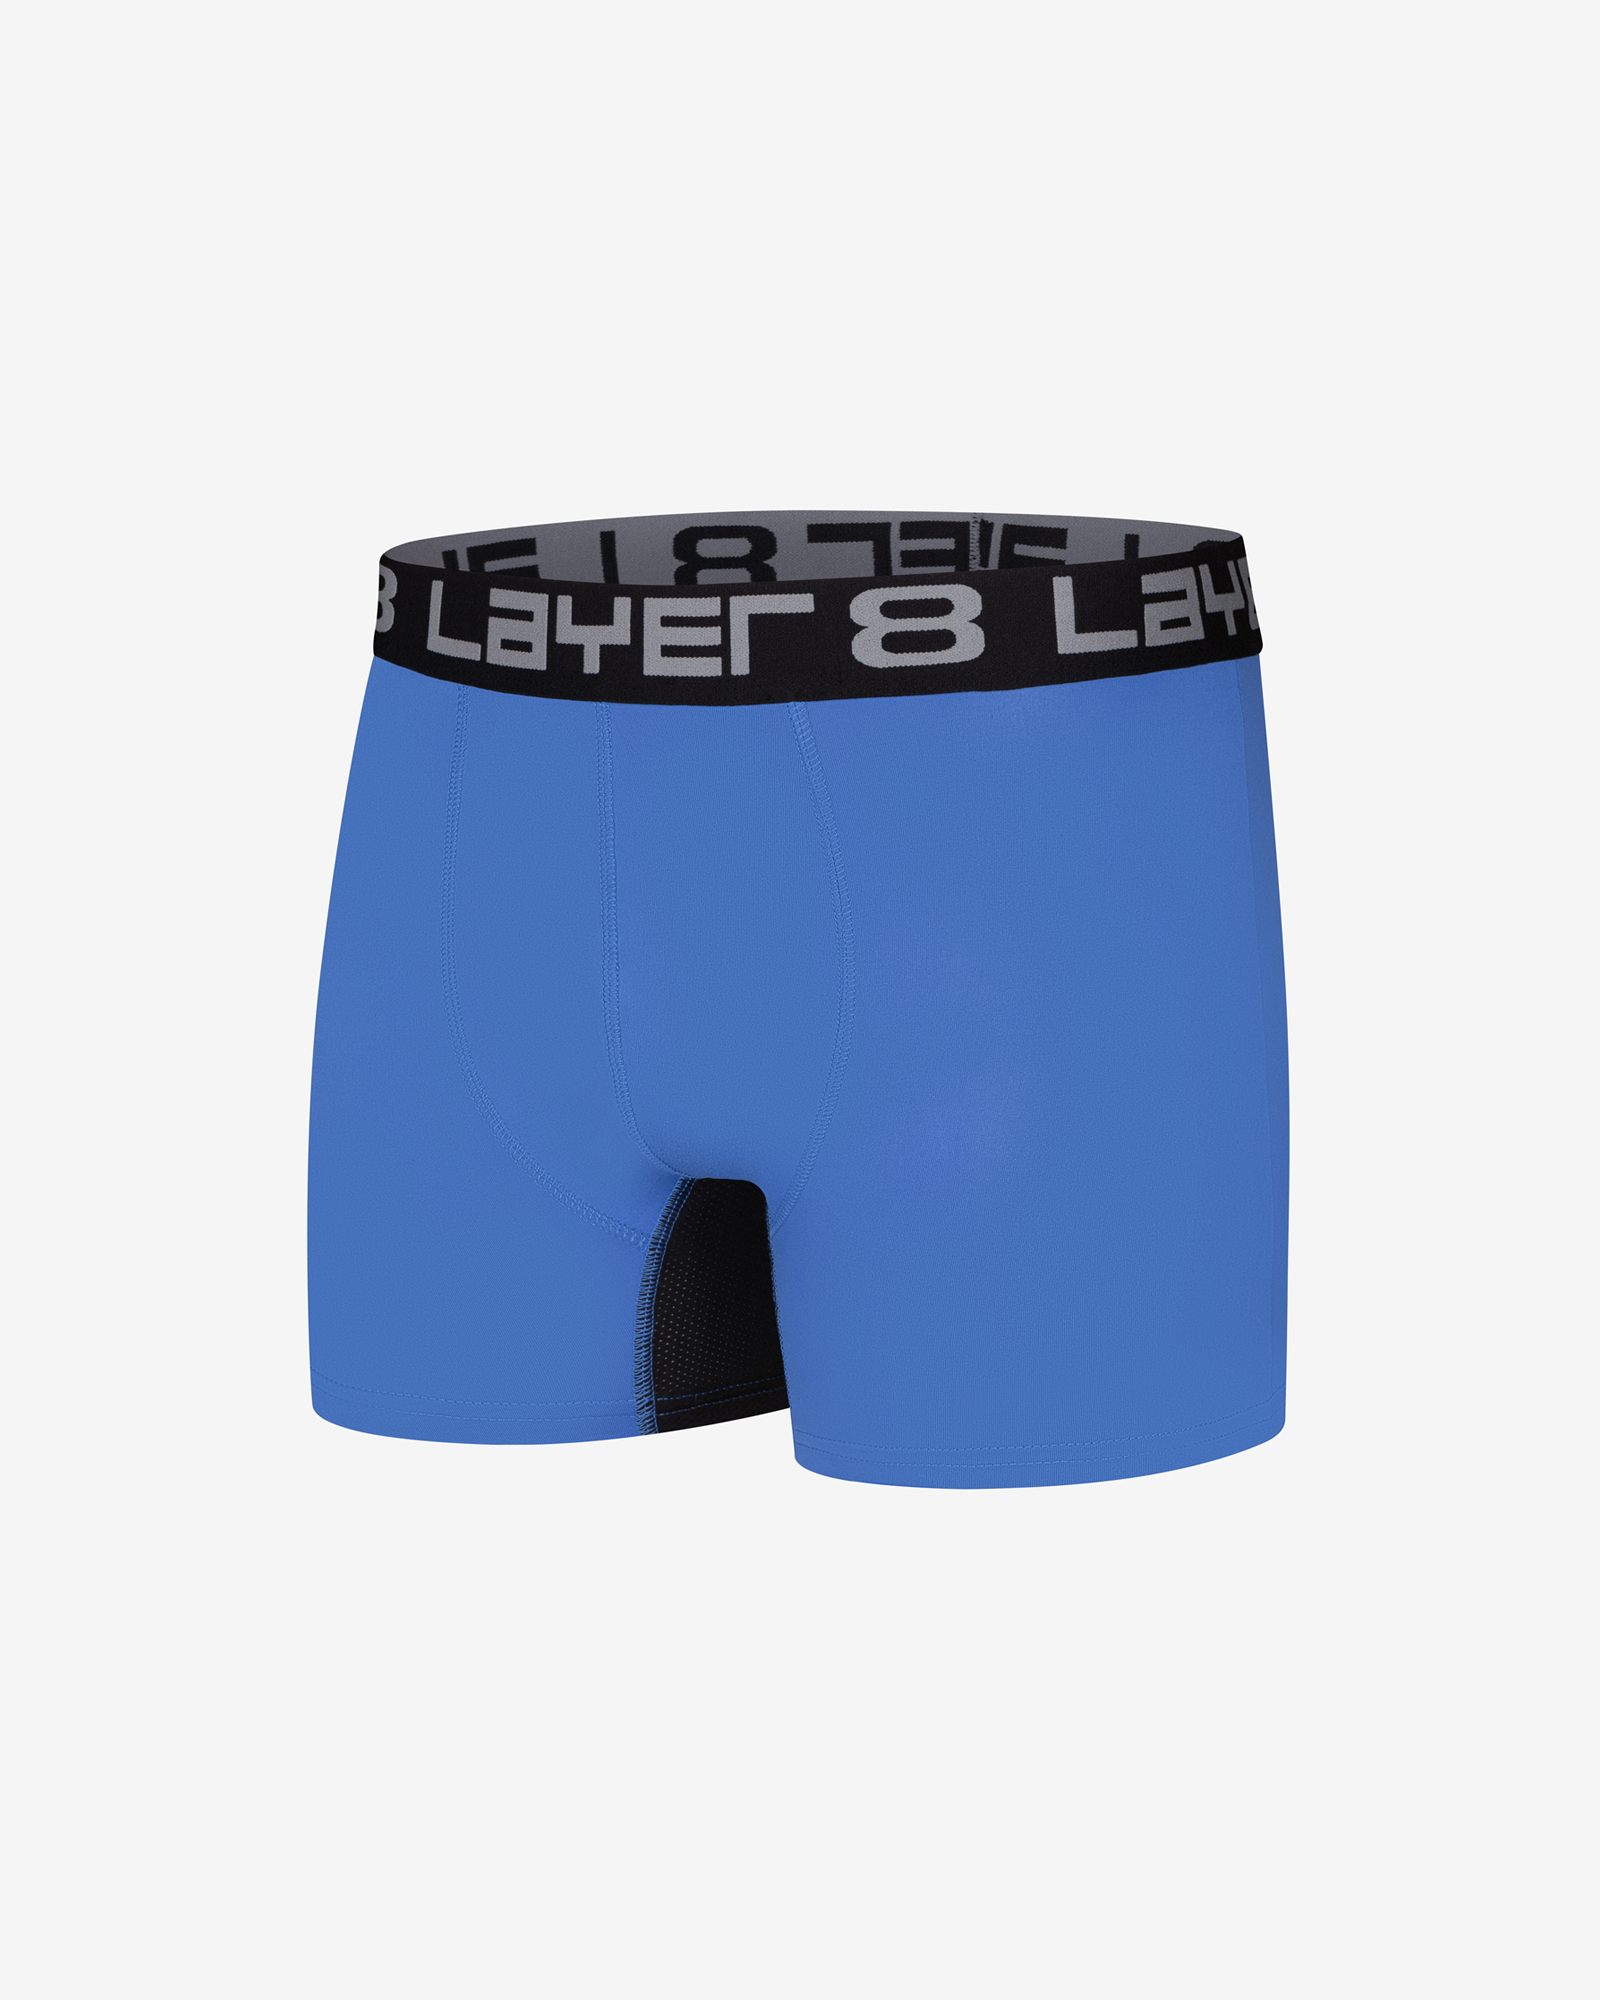 Layer 8 Mens 3 Pack Everyday Boxer Brief